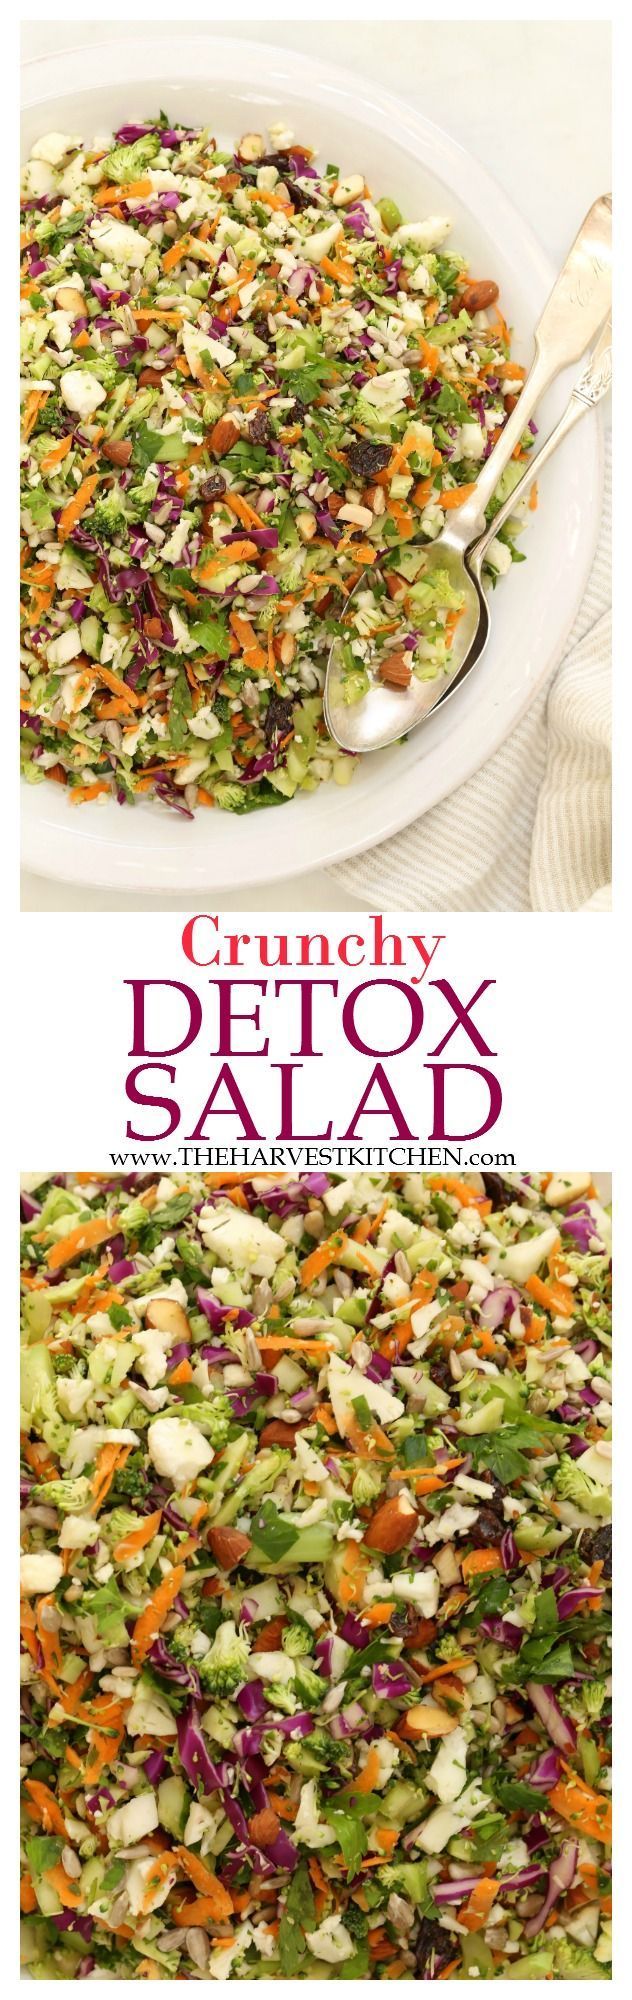 Ready for some salad love? This Crunchy Detox Salad is an ultra simple recipe both for the salad and its dressing. It’s made